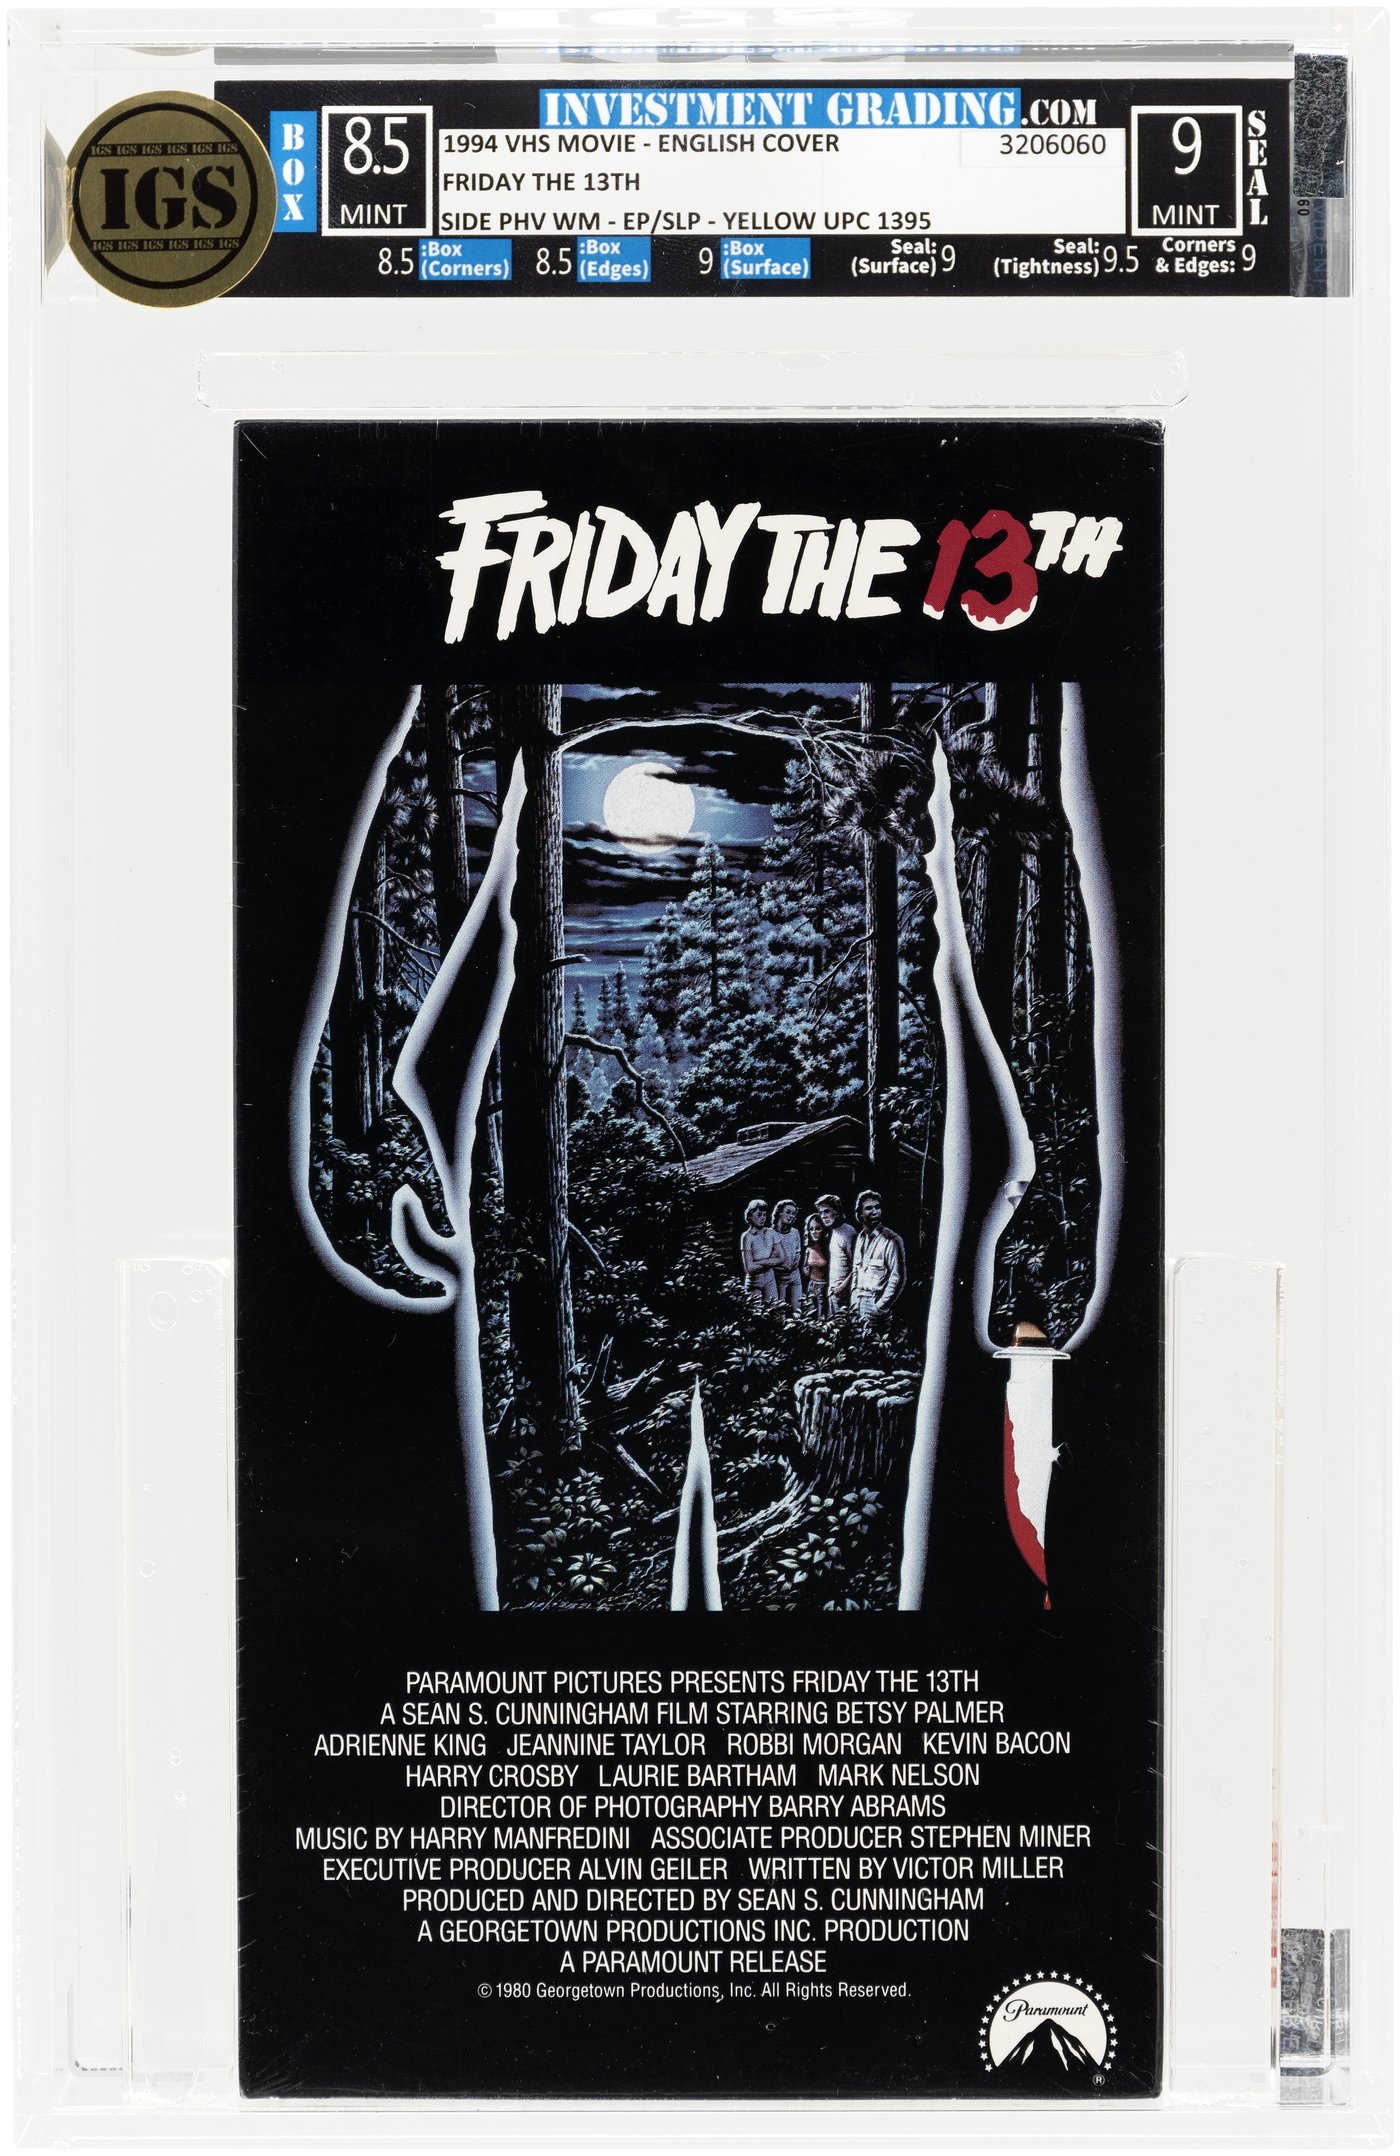 Hakes Friday The 13th Vhs 1994 Igs Box 85 Mint Seal 9 Mint English Coverside Phv Wmep 7636